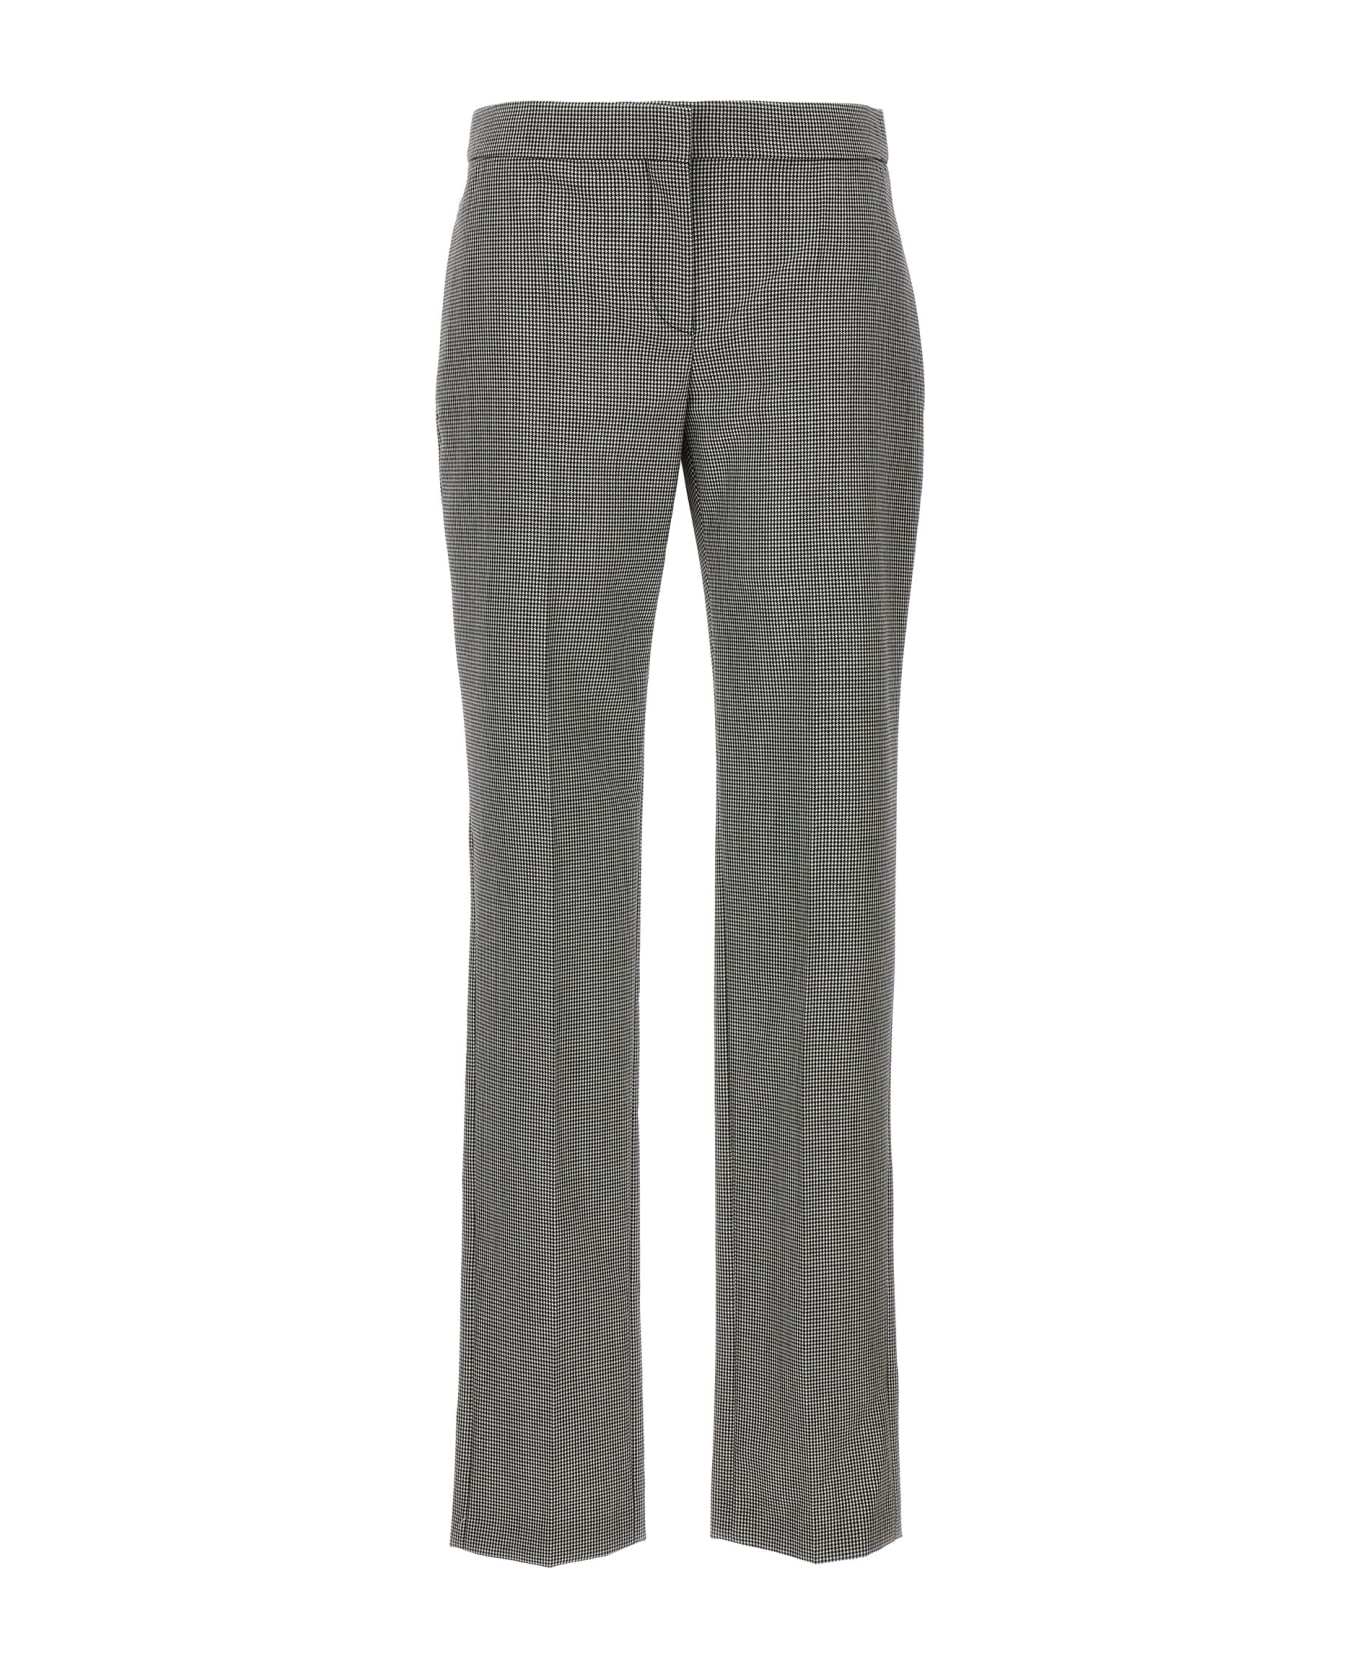 Alexander McQueen Tailored Pants With Houndstooth Motif In Wool - White/Black